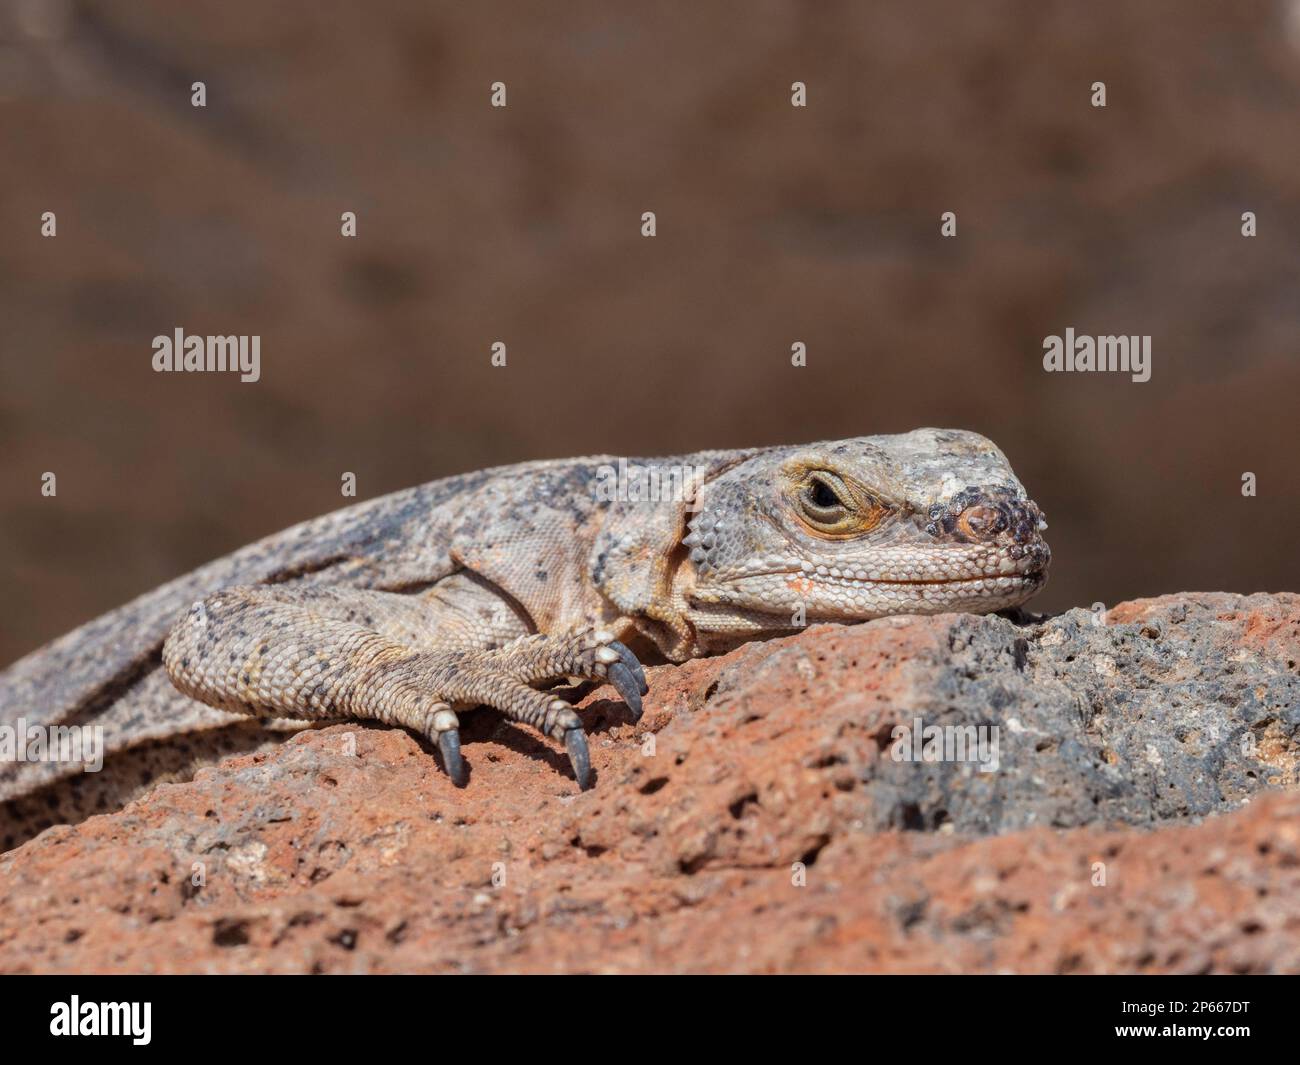 Common chuckwalla (Sauromalus ater), basking in the sun in Red Rock Canyon State Park, California, United States of America, North America Stock Photo